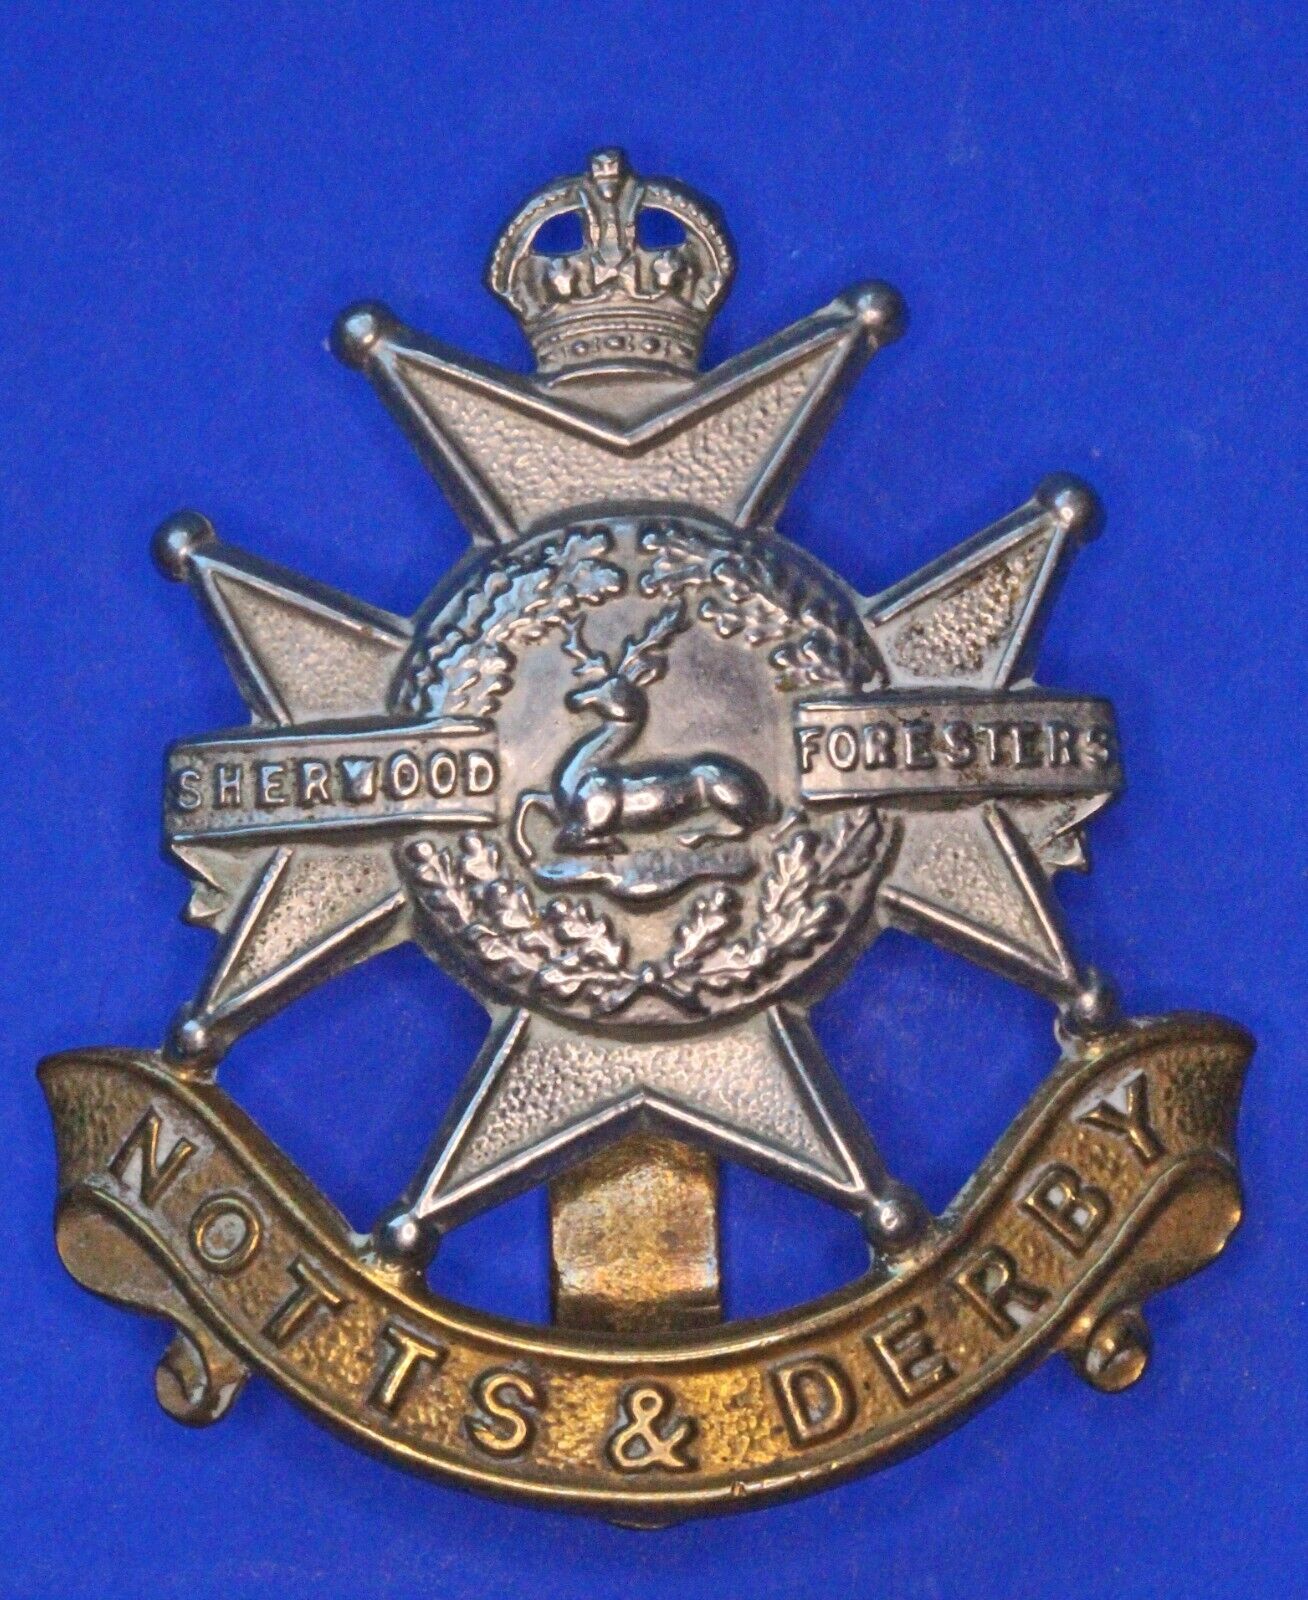 Sherwood Foresters (Notts and Derby) Regiment Cap Badge [28756]